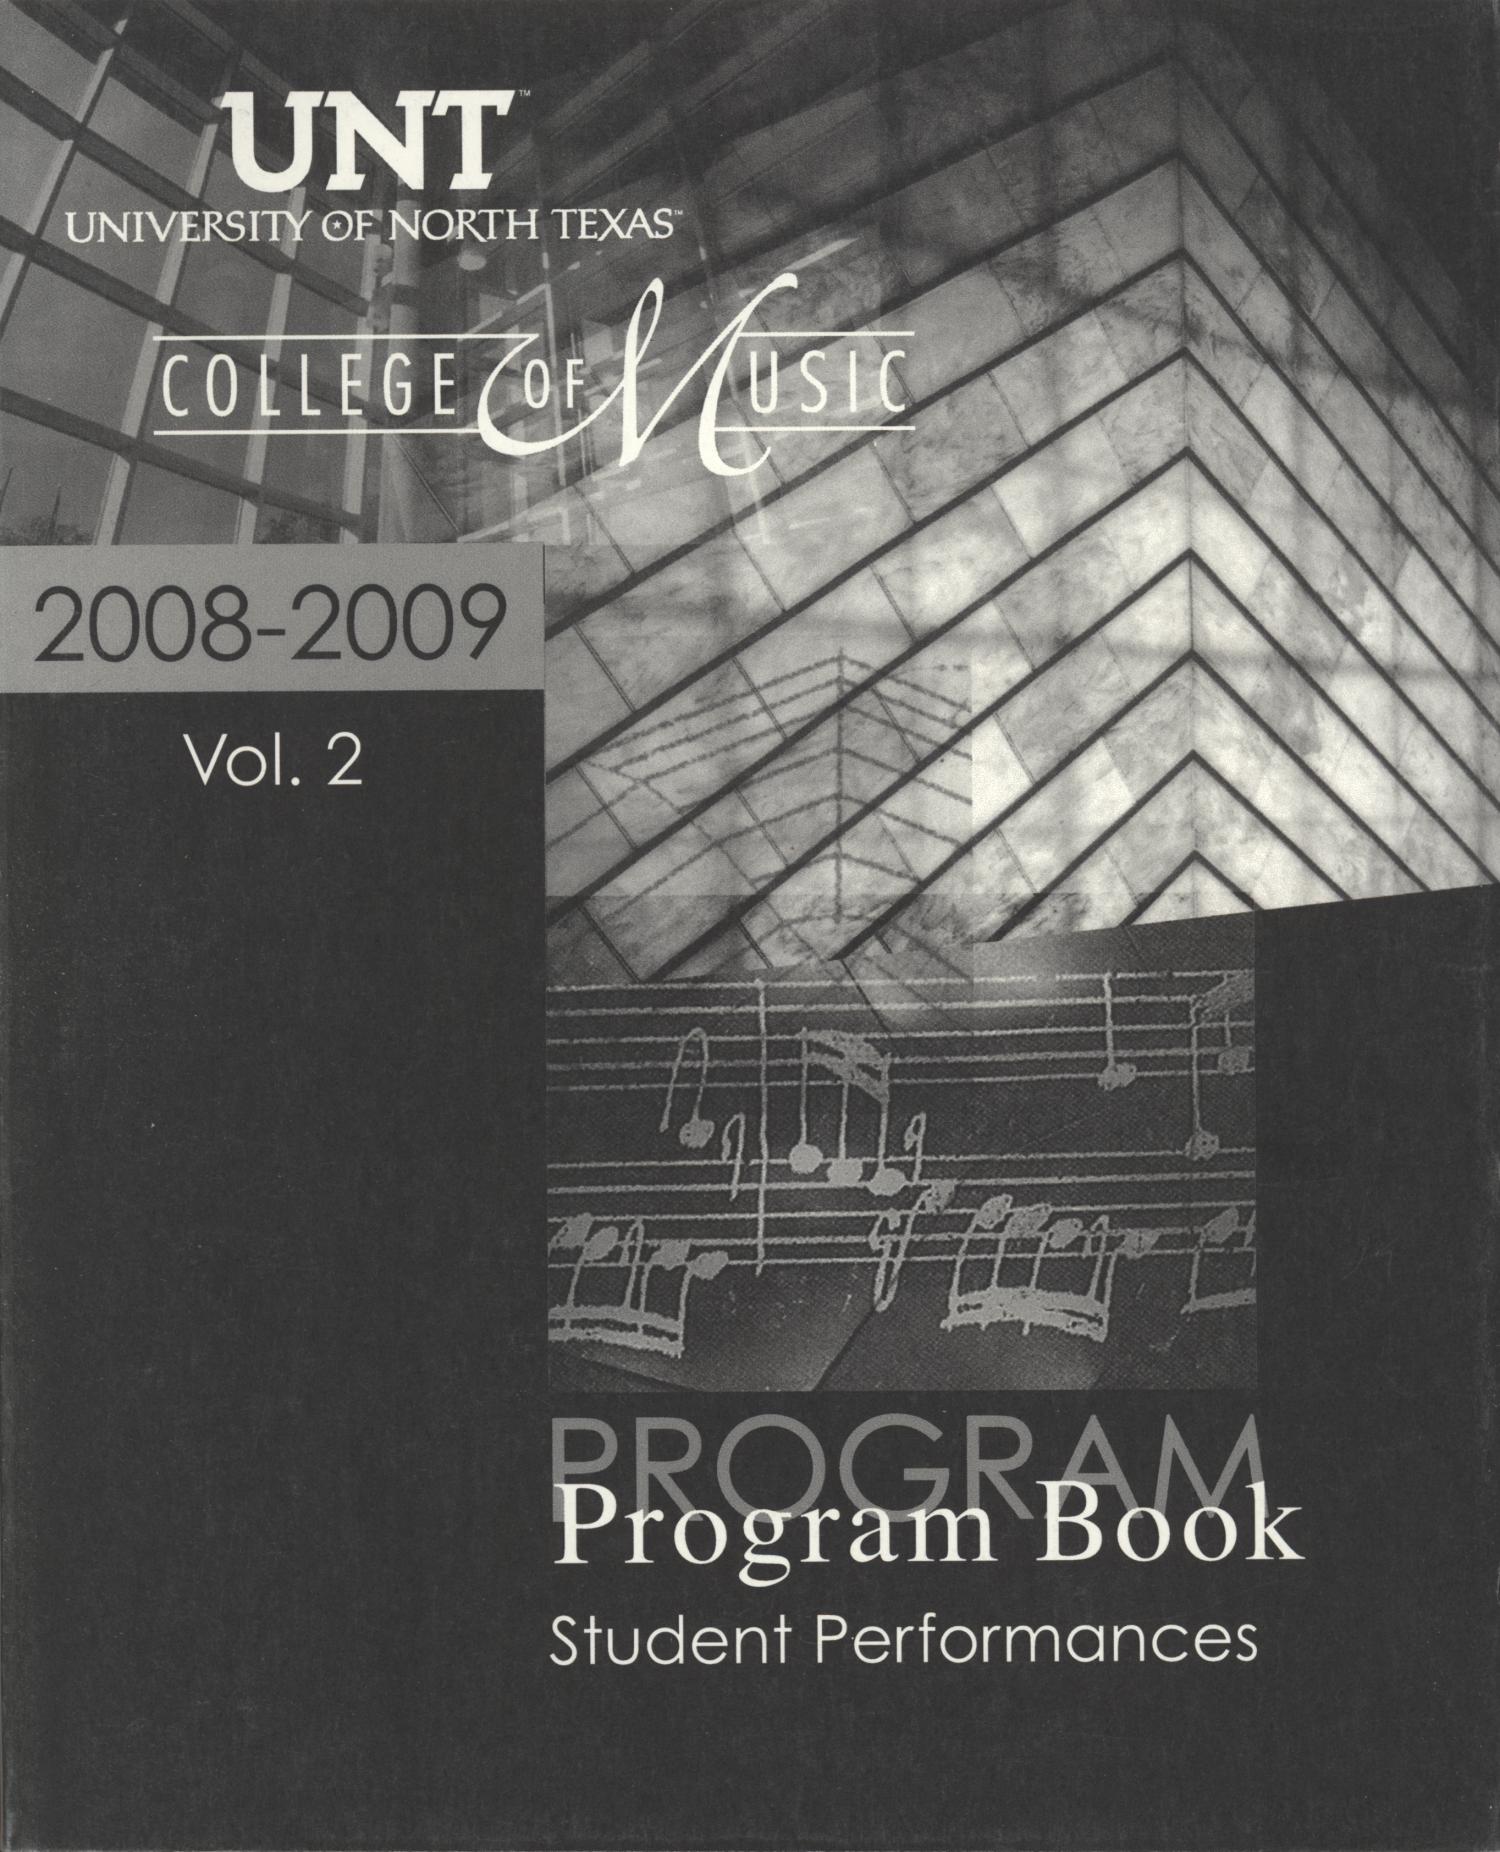 College of Music Program Book 2008-2009: Student Performances, Volume 2
                                                
                                                    Front Cover
                                                